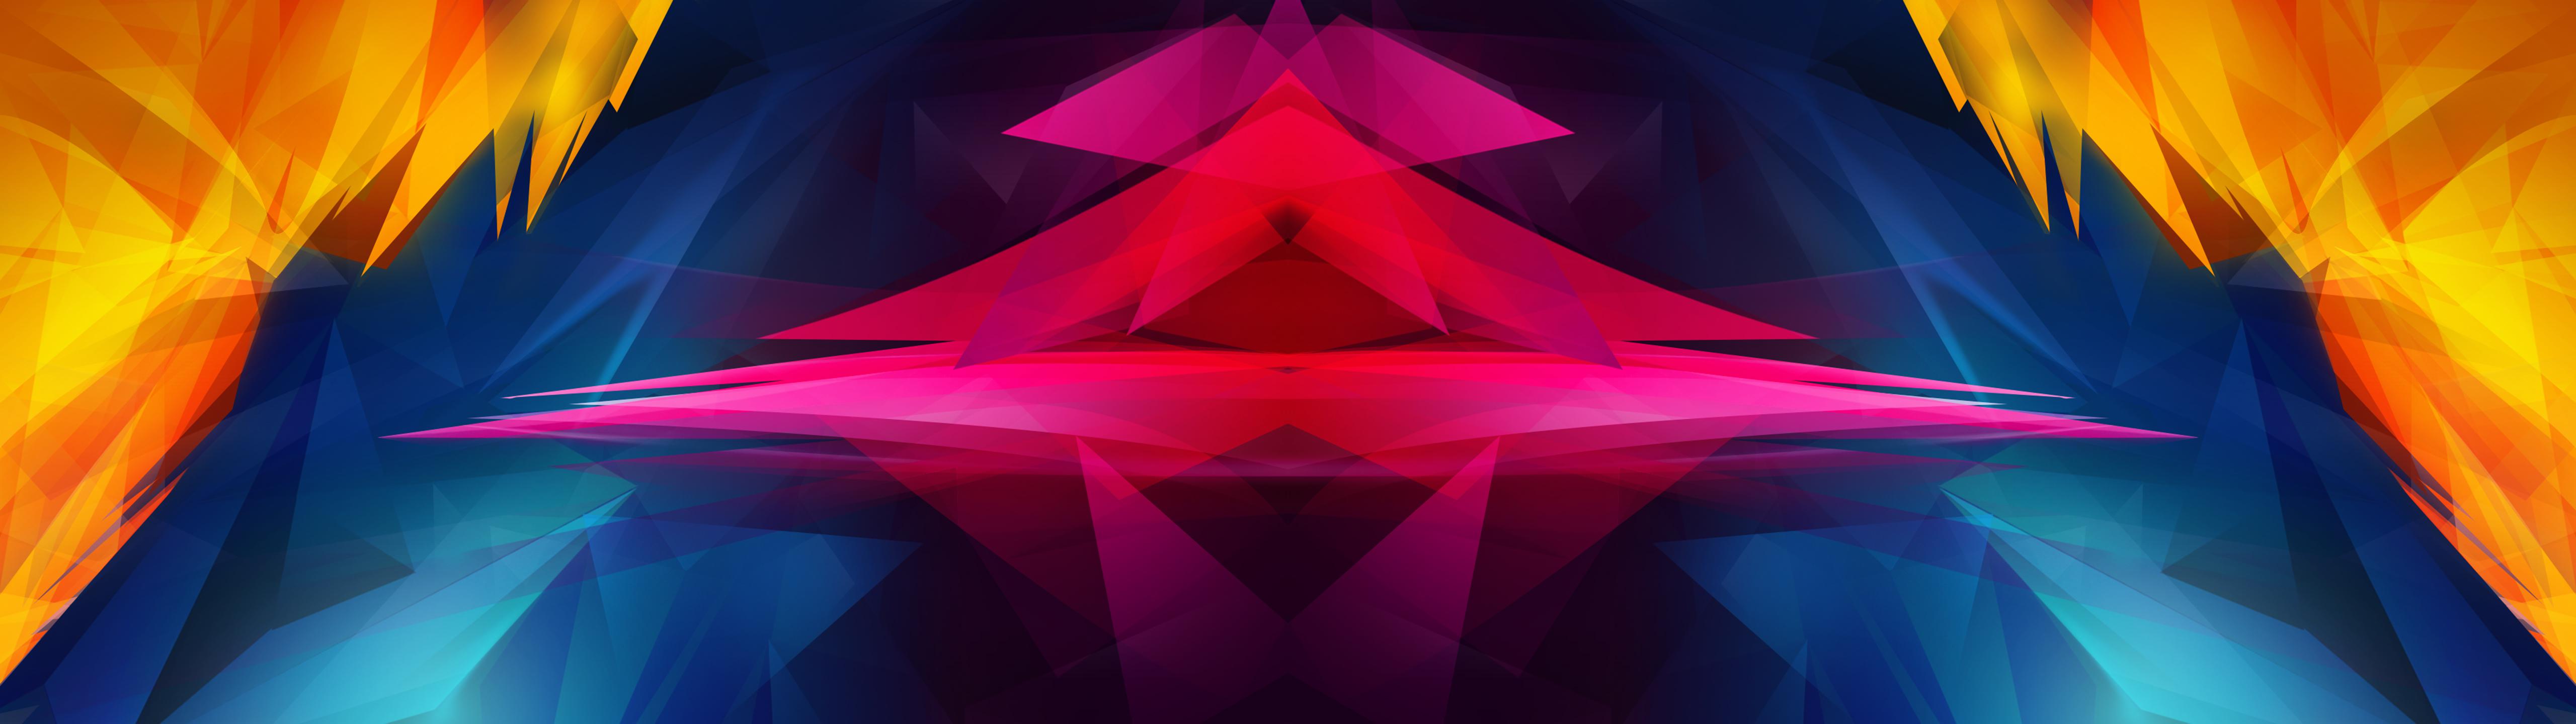 A colorful abstract artwork with geometric shapes - 5120x1440